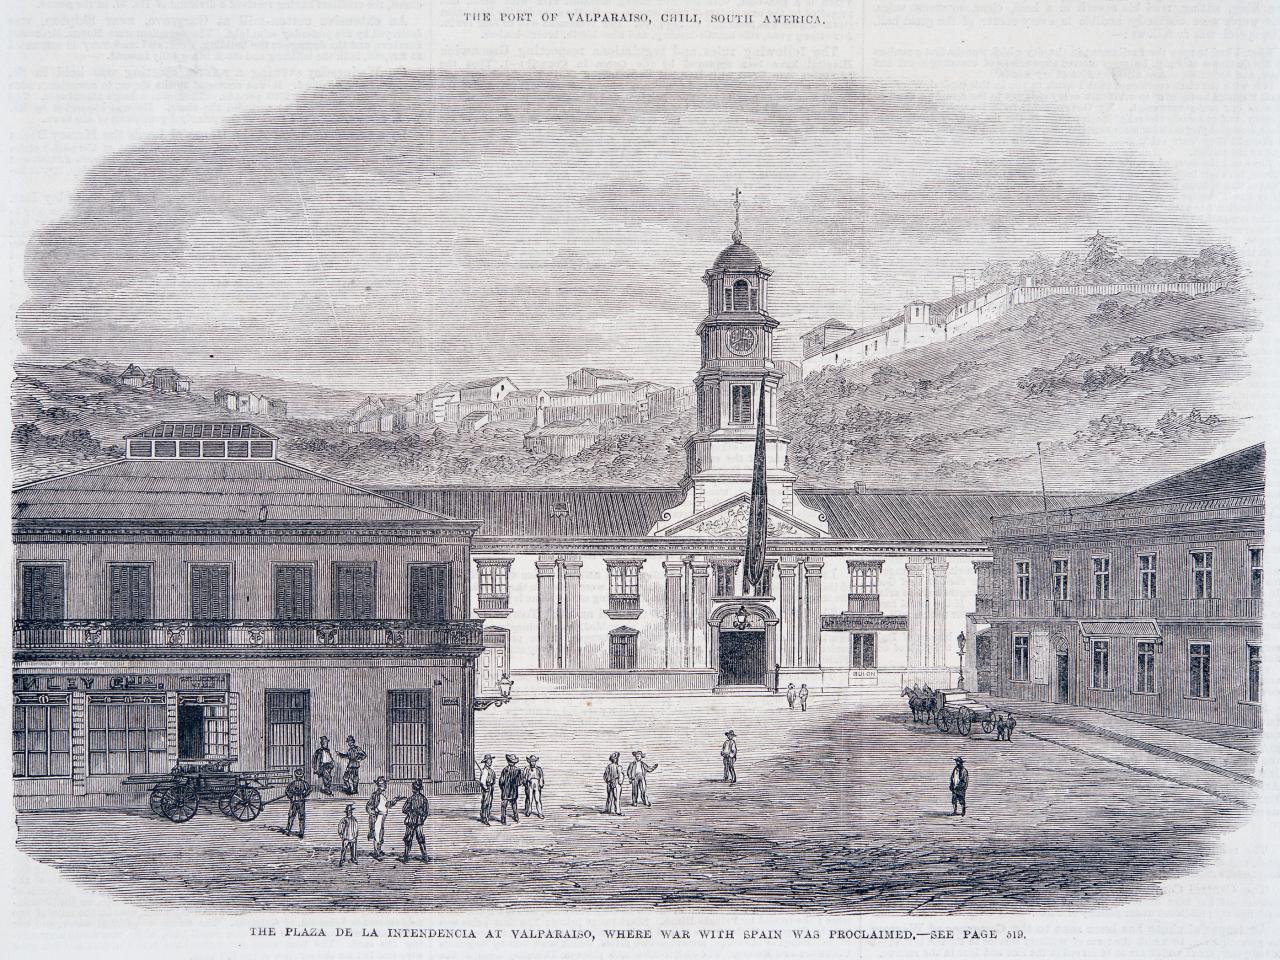 War between Spain and Chili. The Port of Valparaíso, Chili, South America; The Plaza de la Intendencia at Valparaíso, where War with Spain was Proclaimed